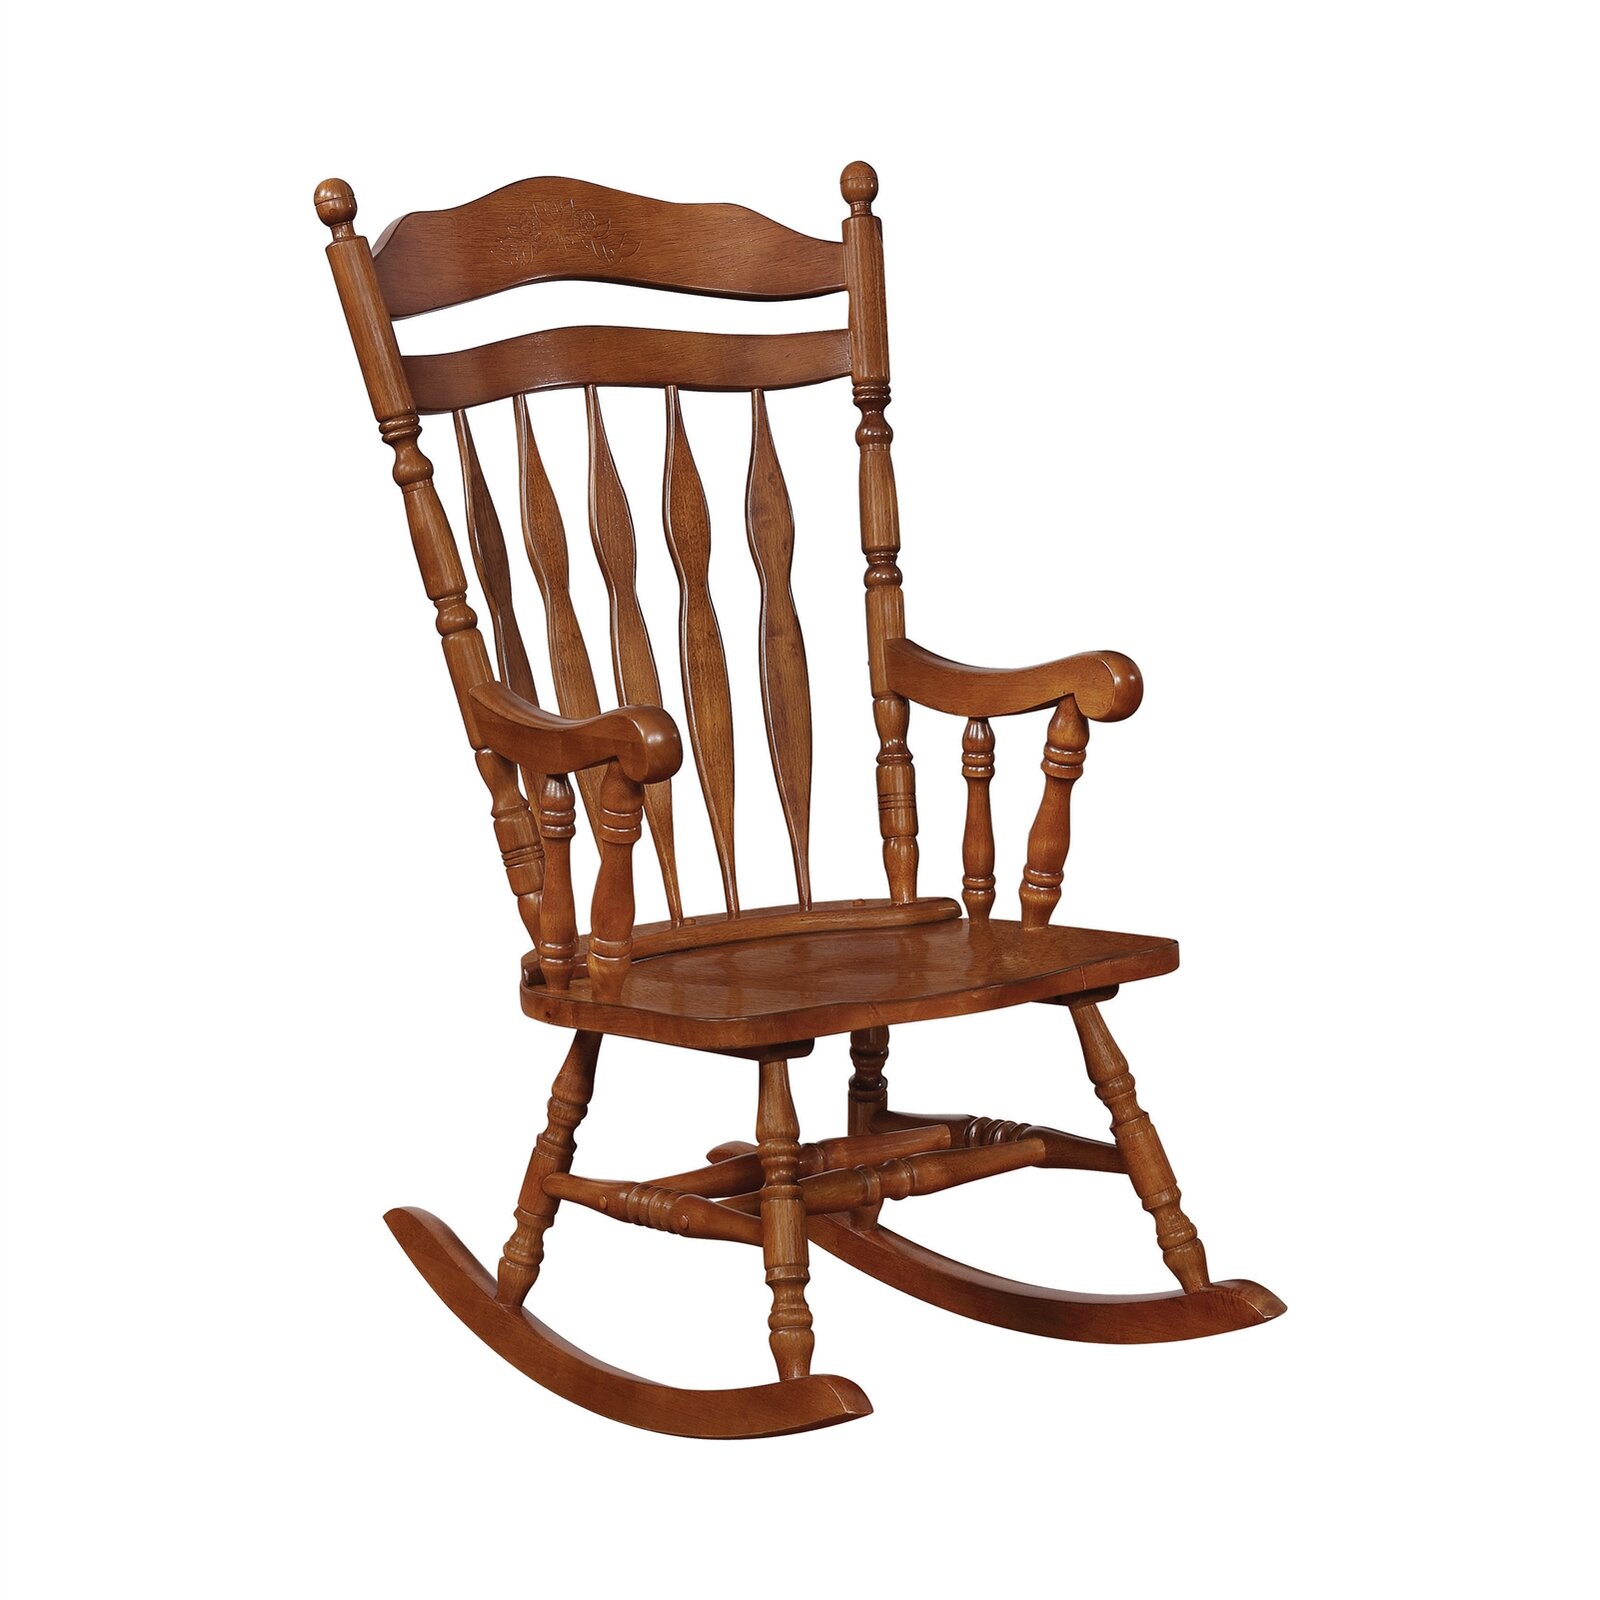 Darby Home Co Rocking Chair